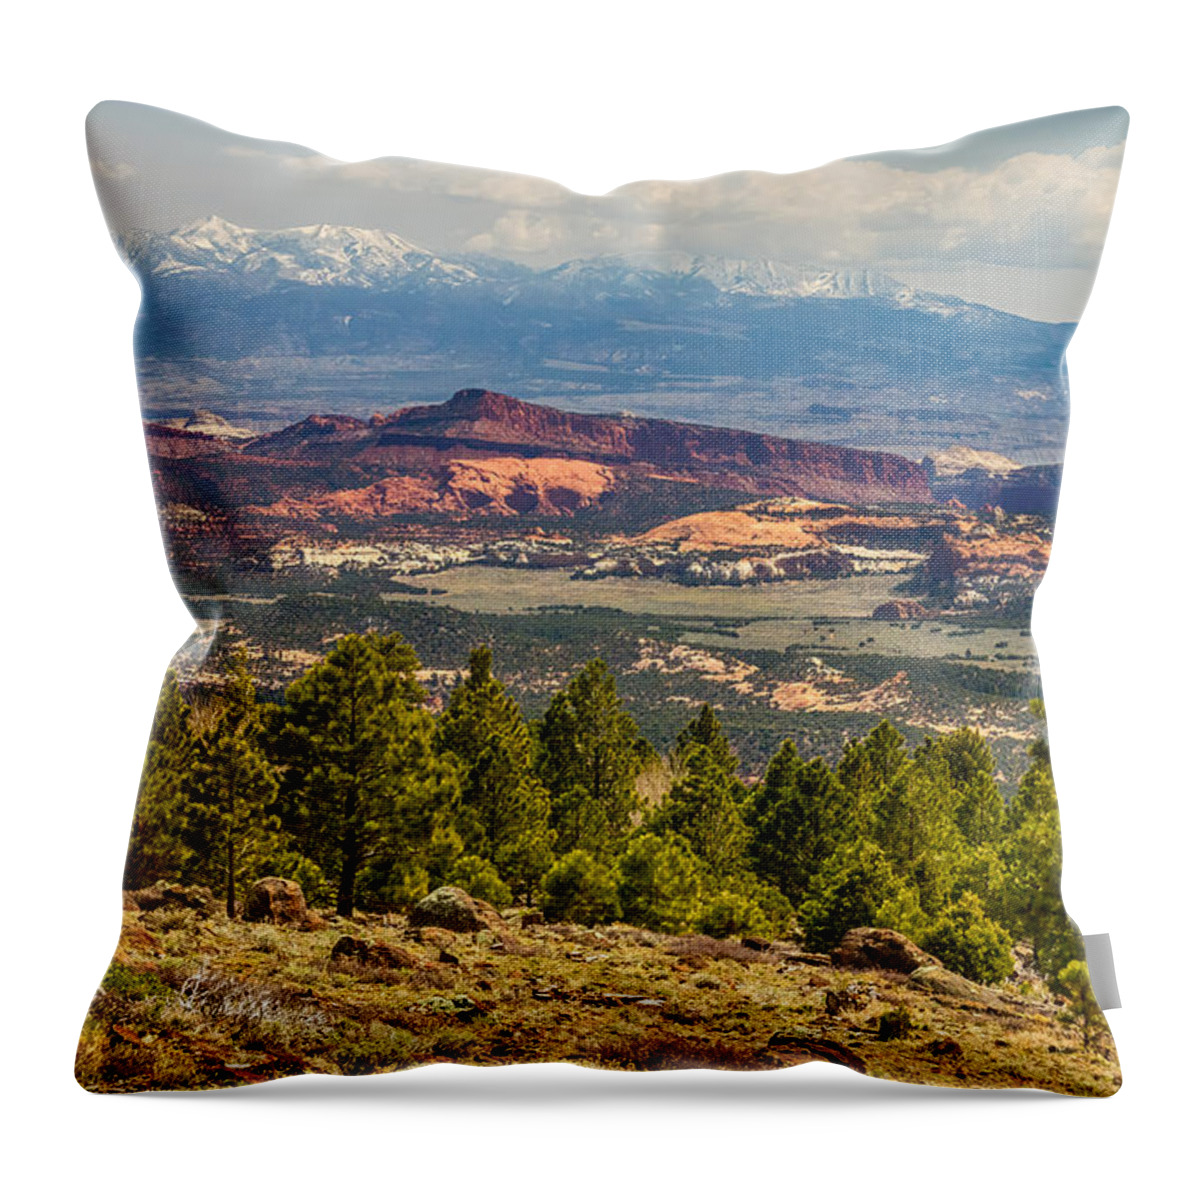 Utah Throw Pillow featuring the photograph Spectacular Utah Landscape Views by James BO Insogna